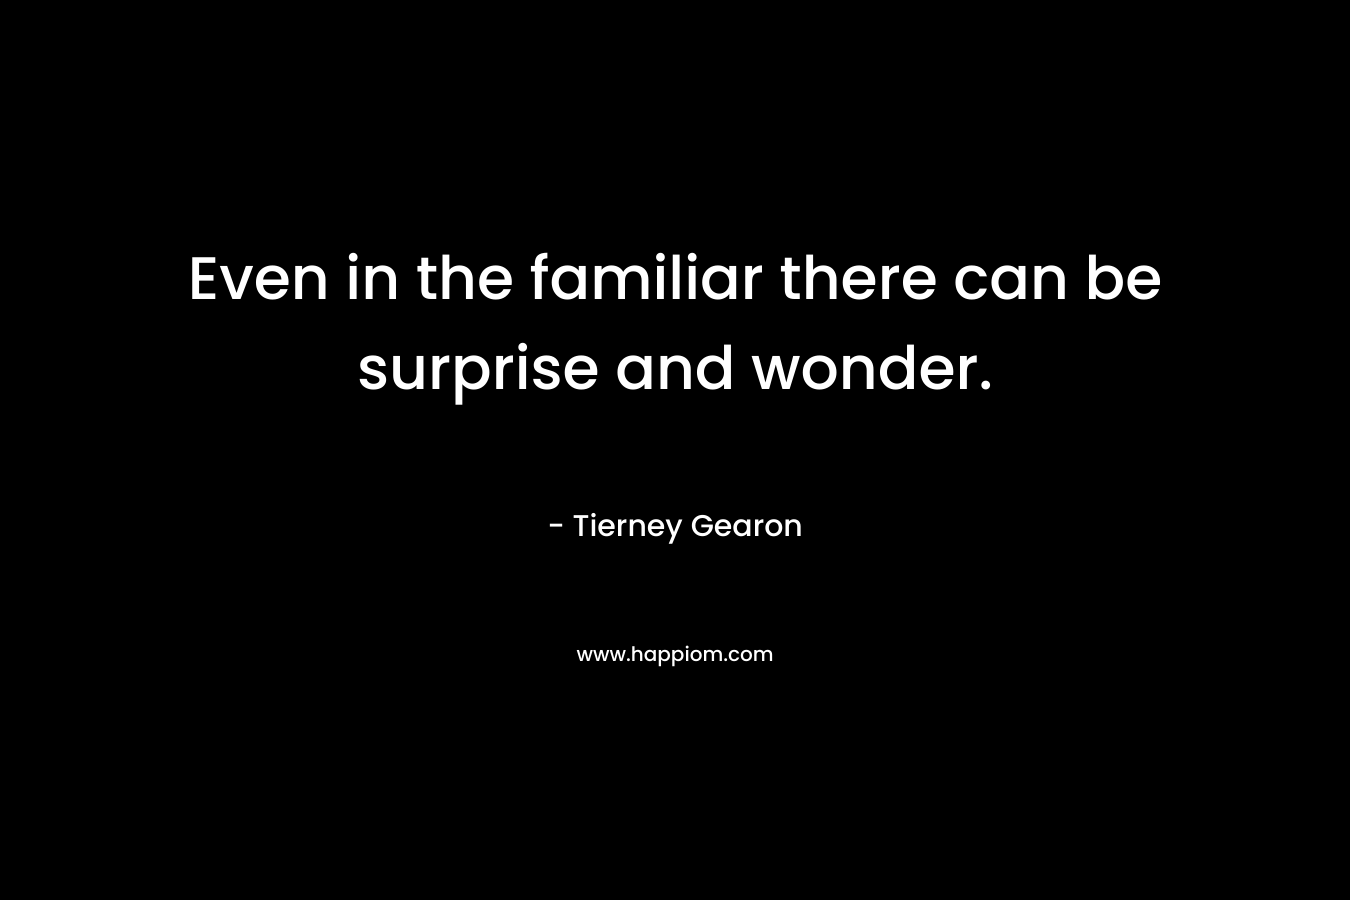 Even in the familiar there can be surprise and wonder. – Tierney Gearon